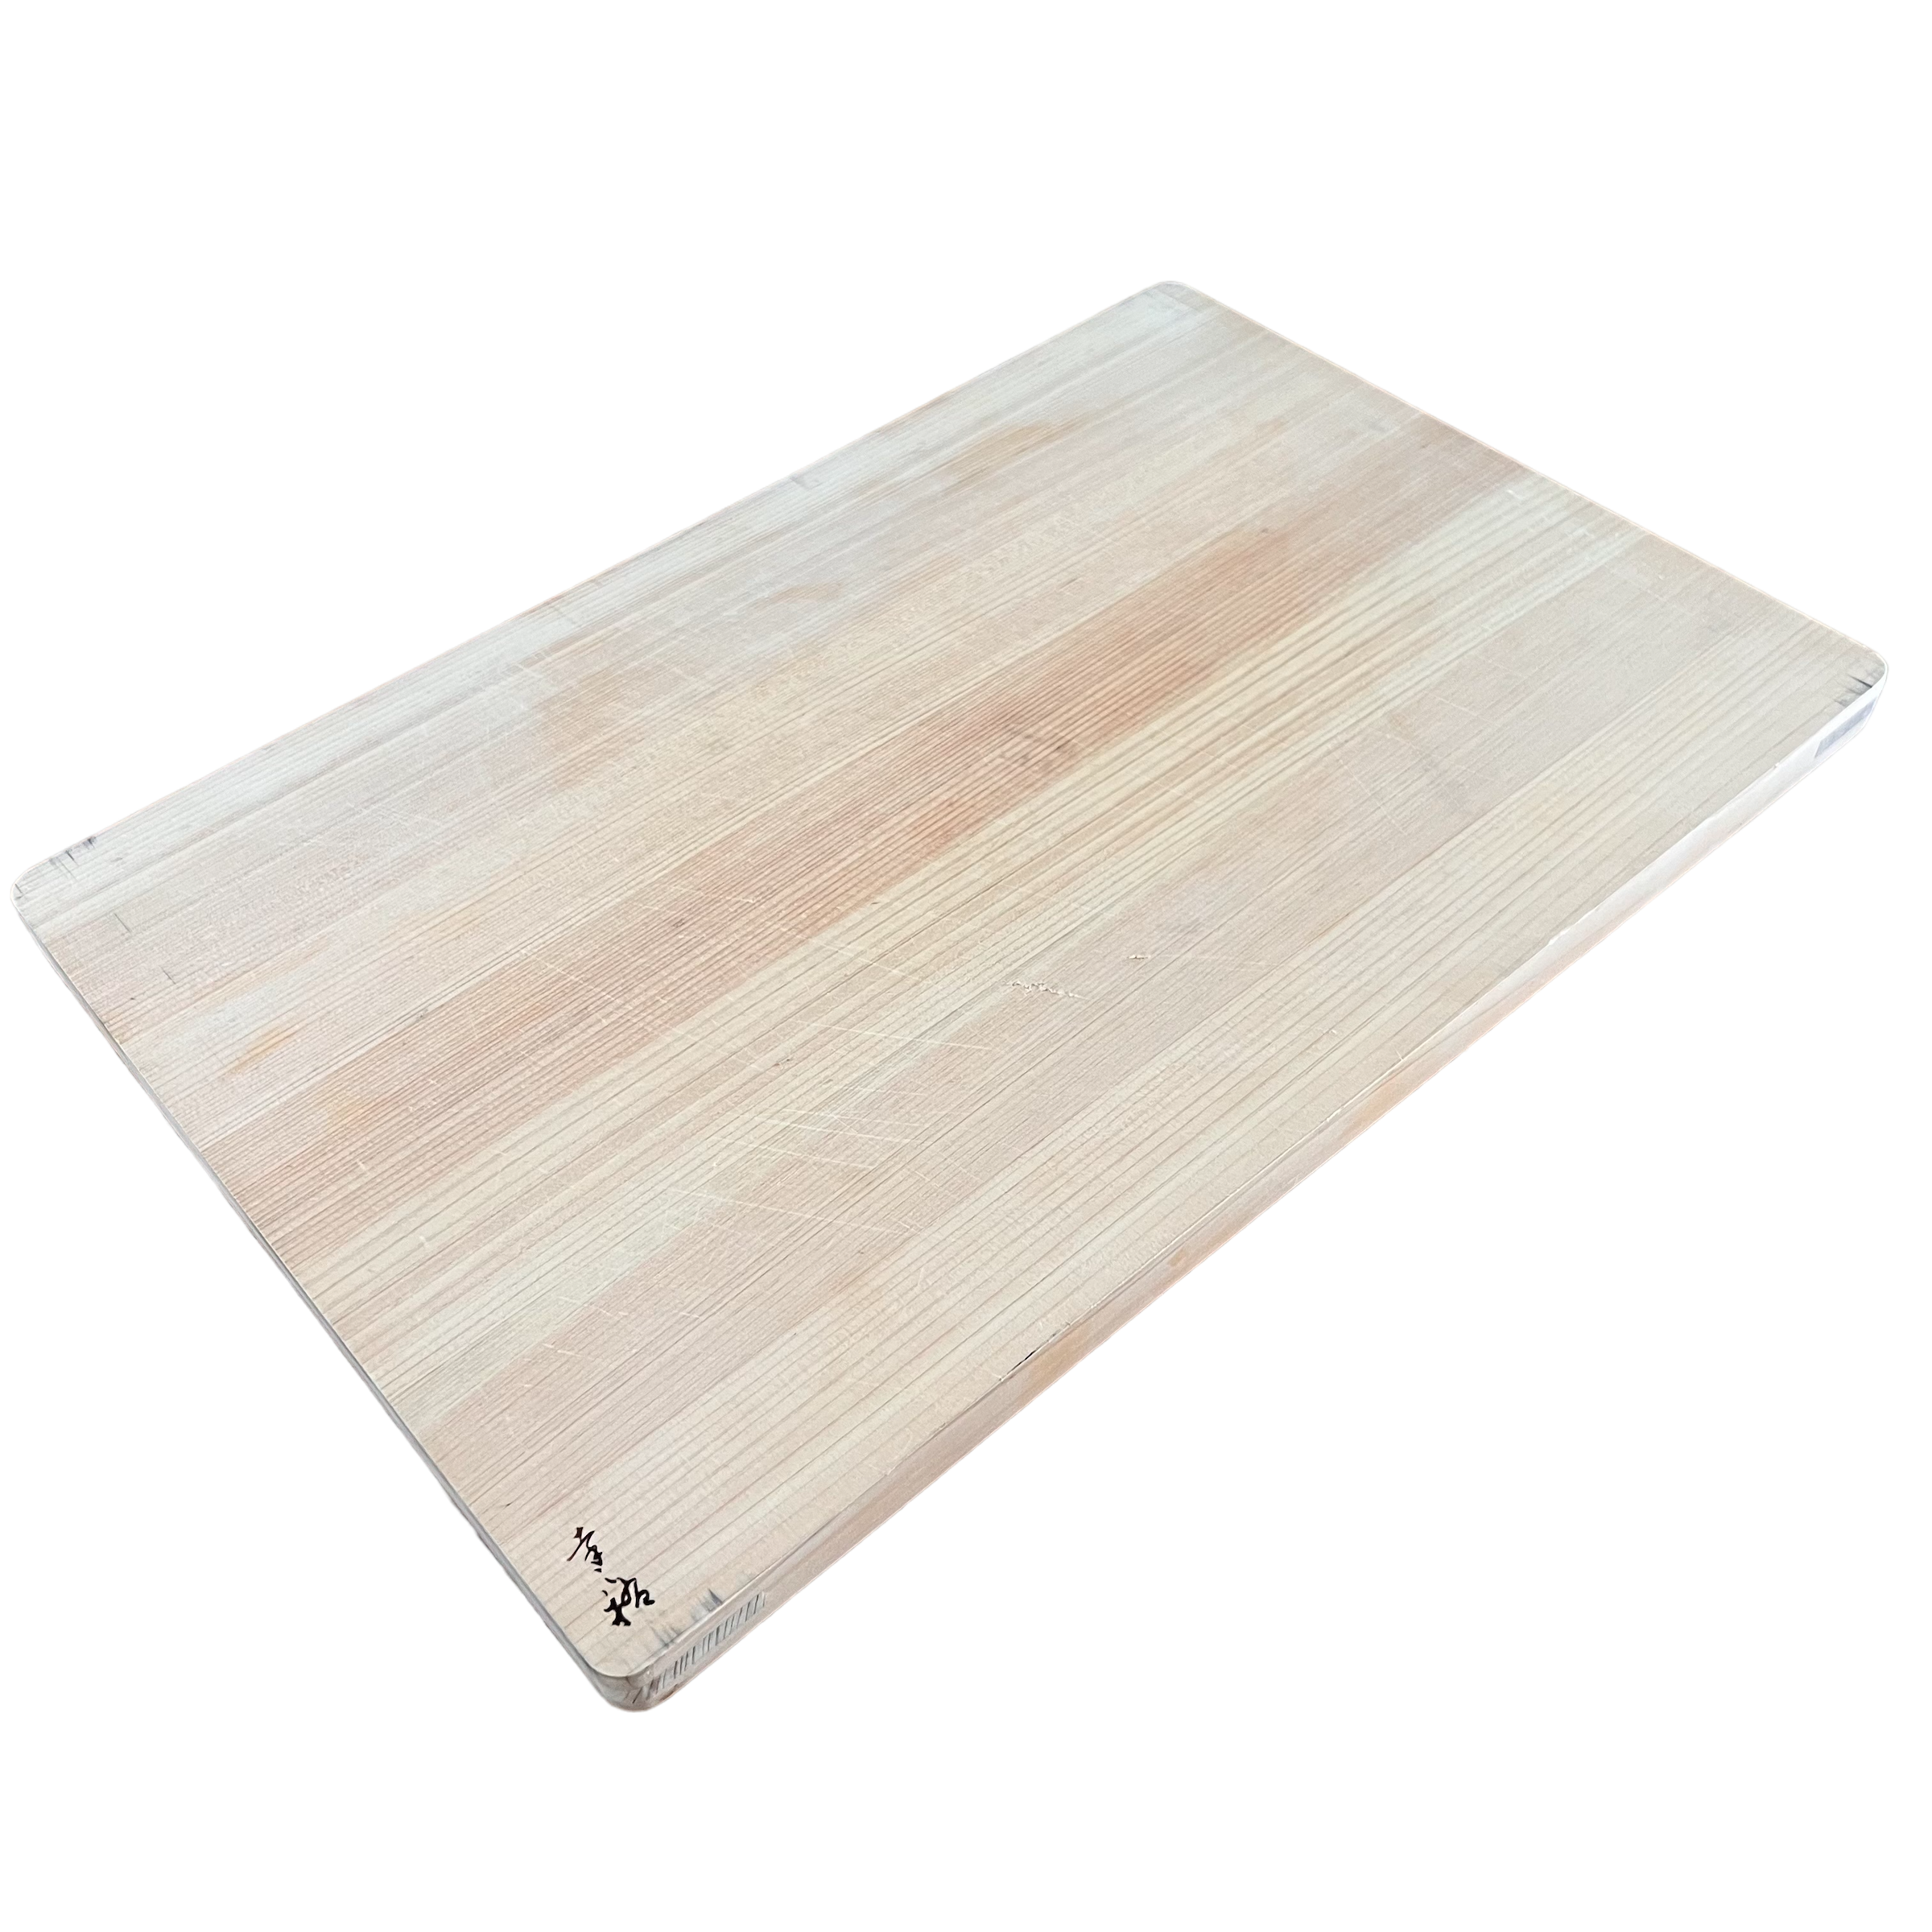 My Favorite (Recycled Plastic) Cutting Boards - Arlyn Says